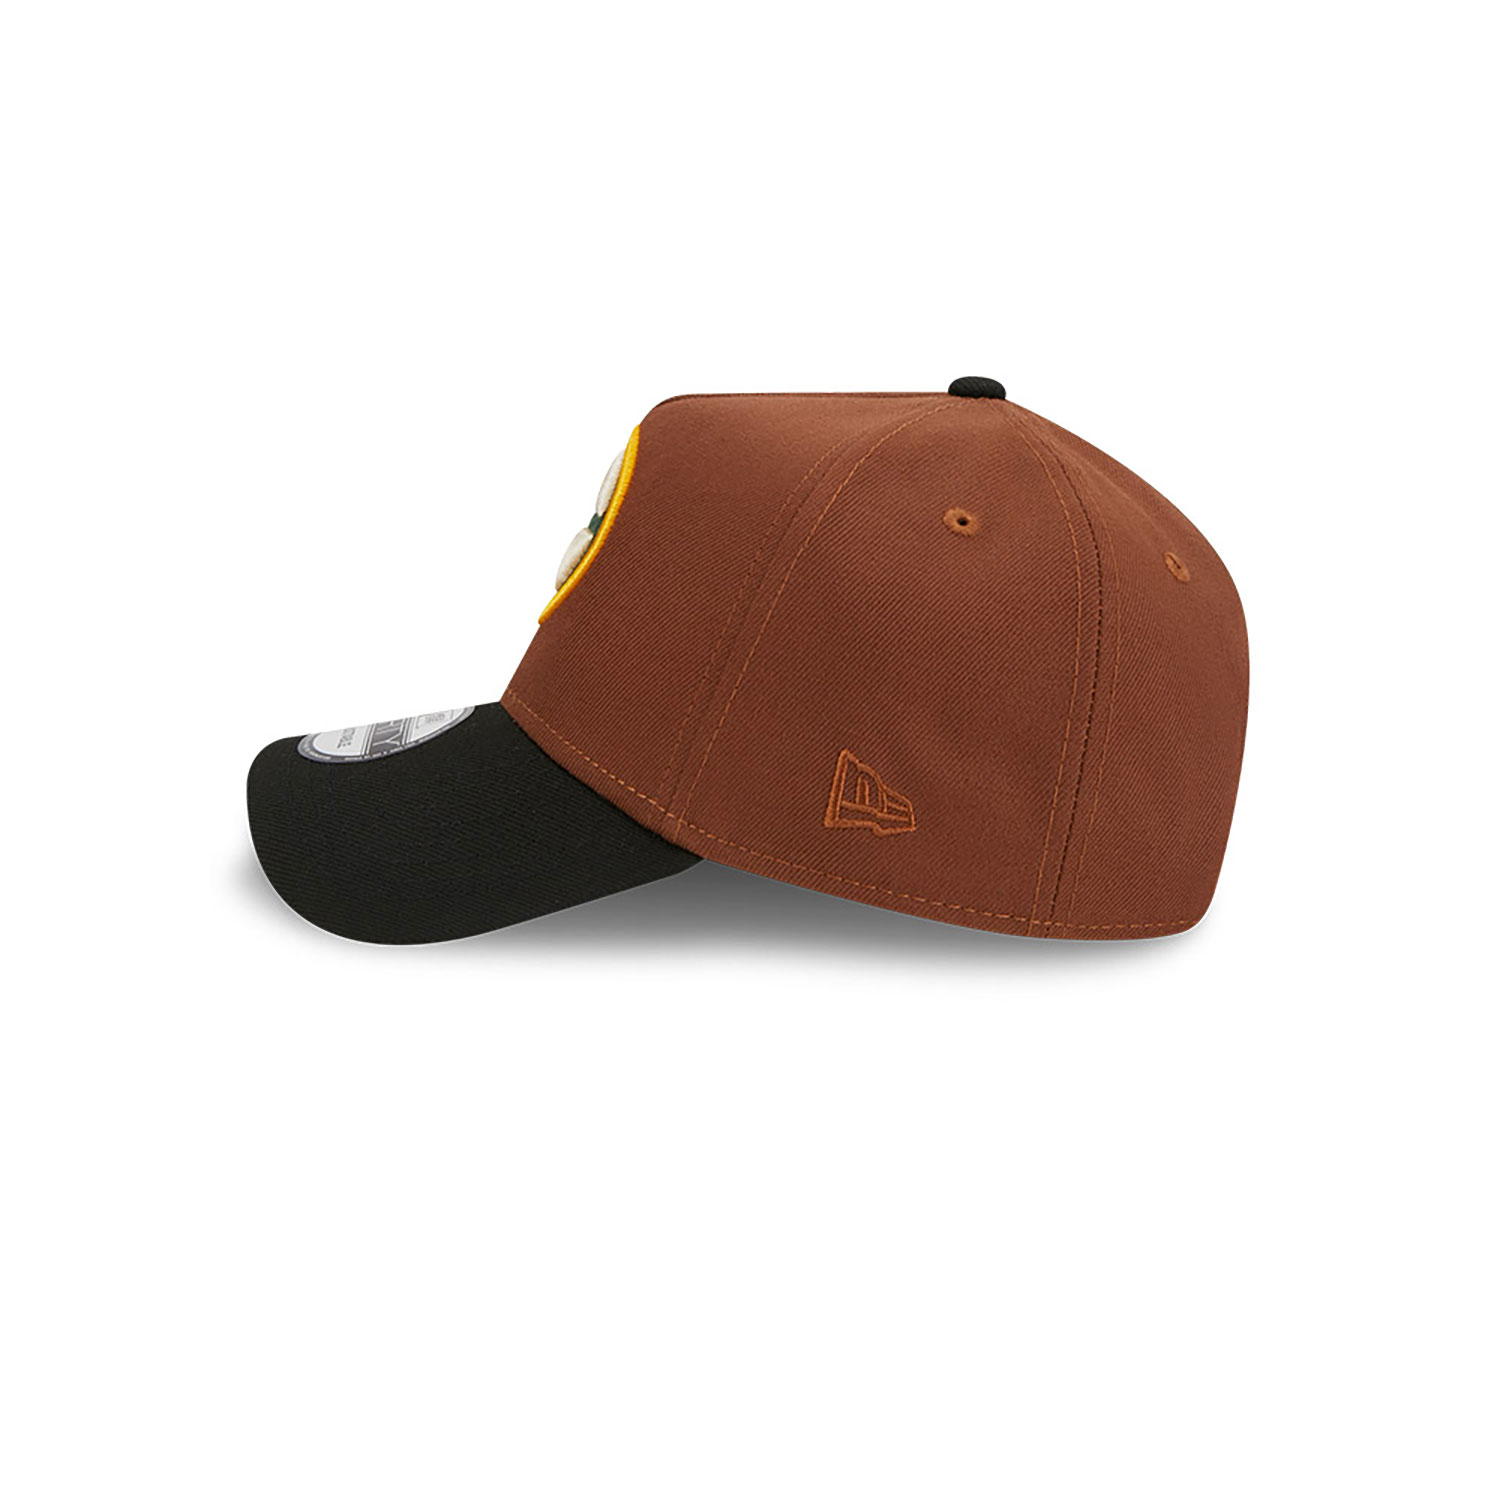 Green Bay Packers Harvest Brown A-Frame 9FORTY Adjustable Cap